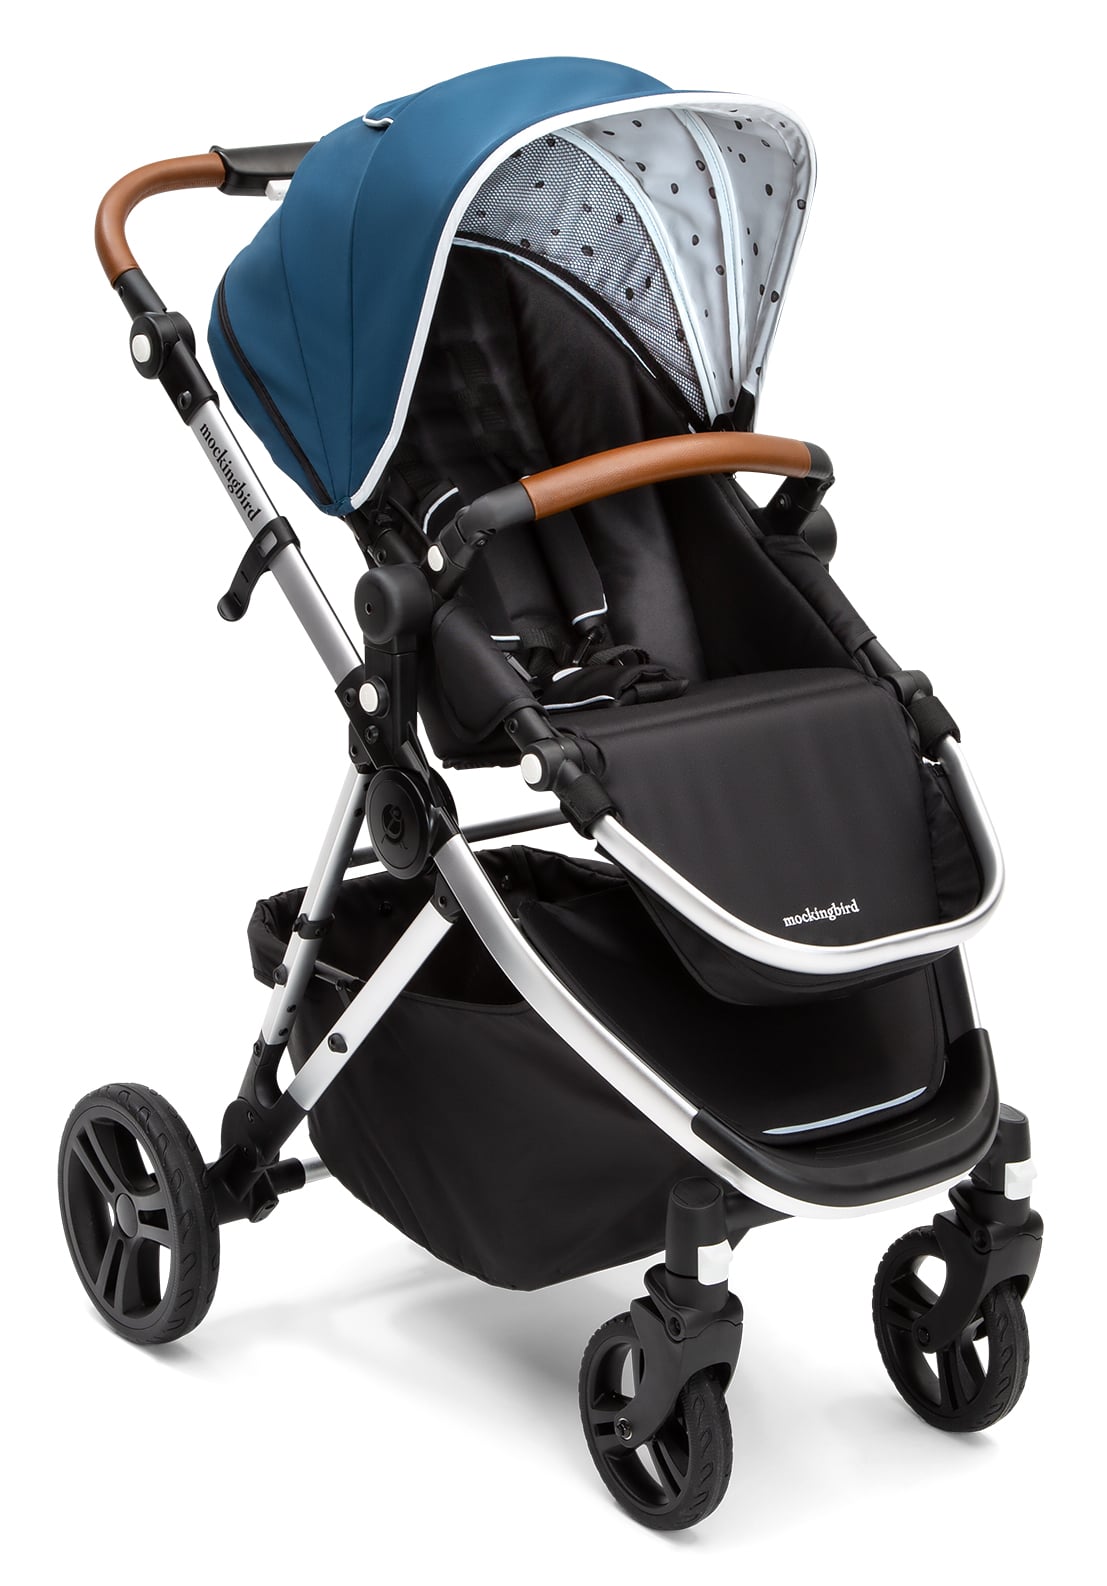 <p><a href="https://hellomockingbird.com/products/mockingbird-stroller">BUY NOW</a></p><p>$395</p><p><strong>The <a href="https://hellomockingbird.com/products/mockingbird-stroller" class="ga-track">Mockingbird Stroller</a> ($395) </strong></p> <p>This stroller has tons of buzz for good reason. It has great suspension and large back wheels, which means it rides like a dream. Folding down this 26-pound stroller is super simple, too. You truly can do it with one hand and barely any practice, and it locks in place once collapsed. Included are a UPF 50+ all-weather canopy with a large peekaboo window, a multiposition reclining seat, a footrest that unzips underneath (to make it easy to clean out snack crumbs), adjustable handlebars, and <em>giant</em> storage basket below the seat.</p>